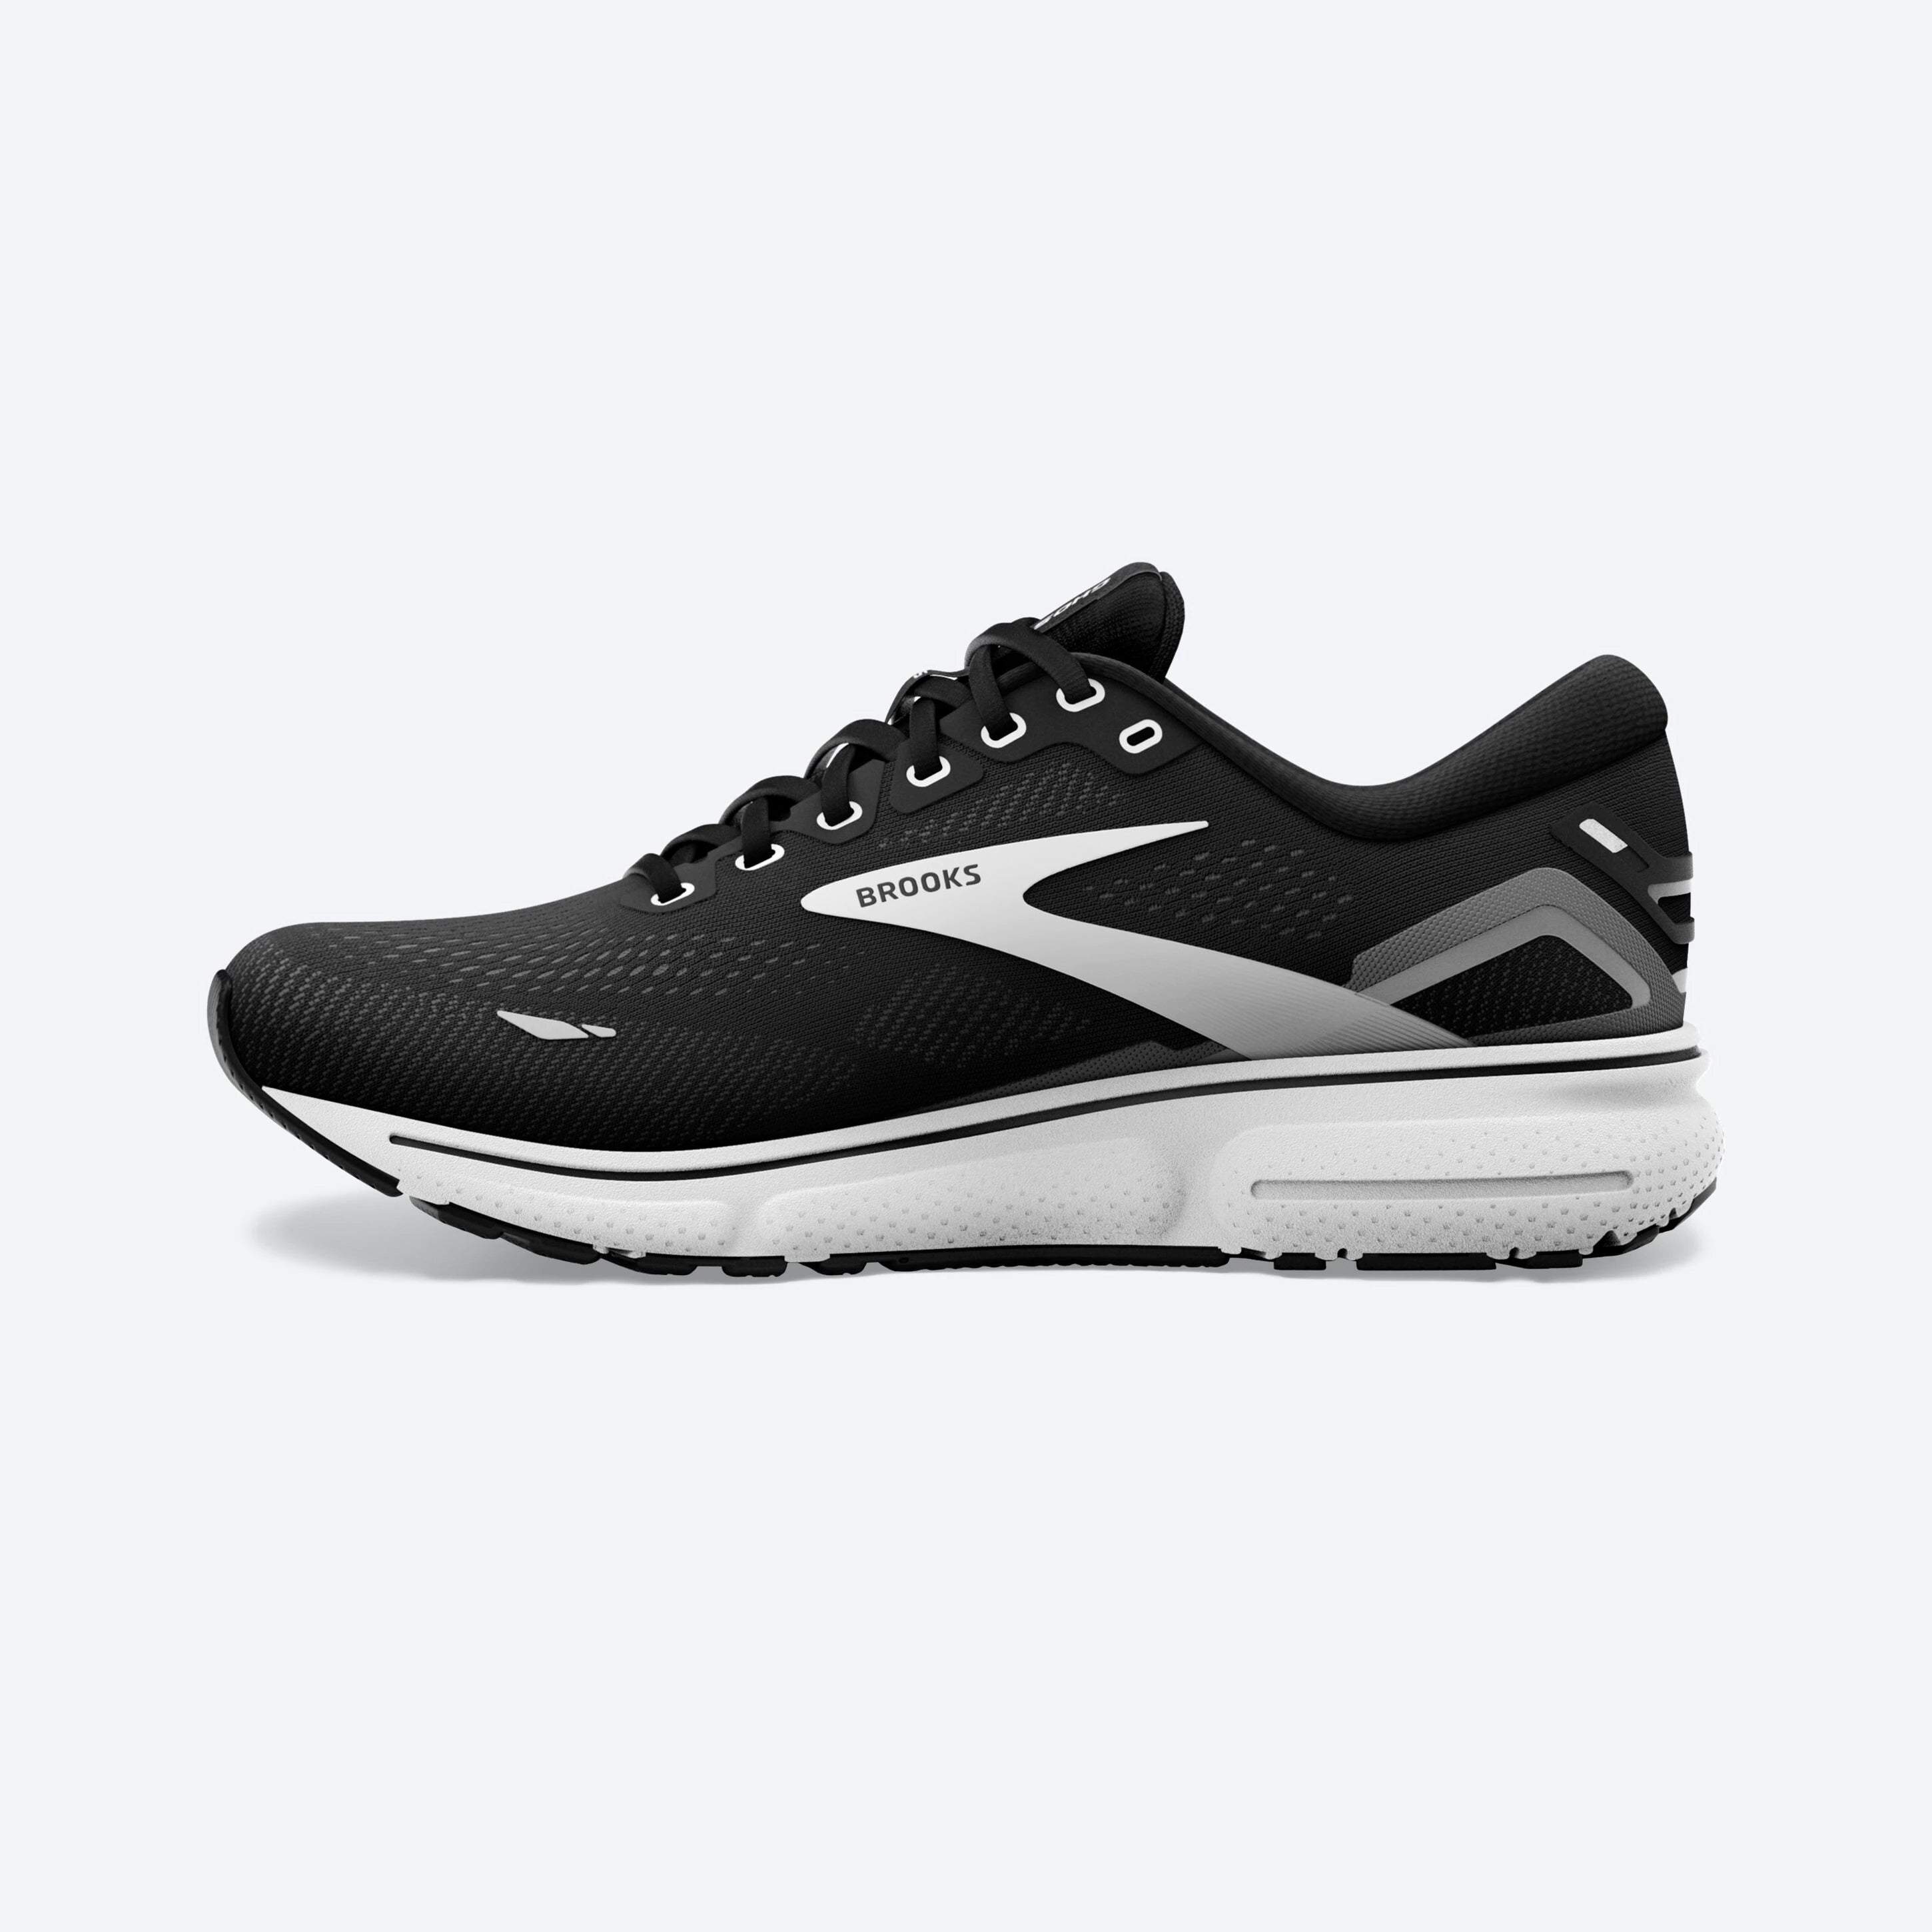 Medial view of the Women's Ghost 15 by Brooks in the wide D width, color Black/BlackenedPearl/White